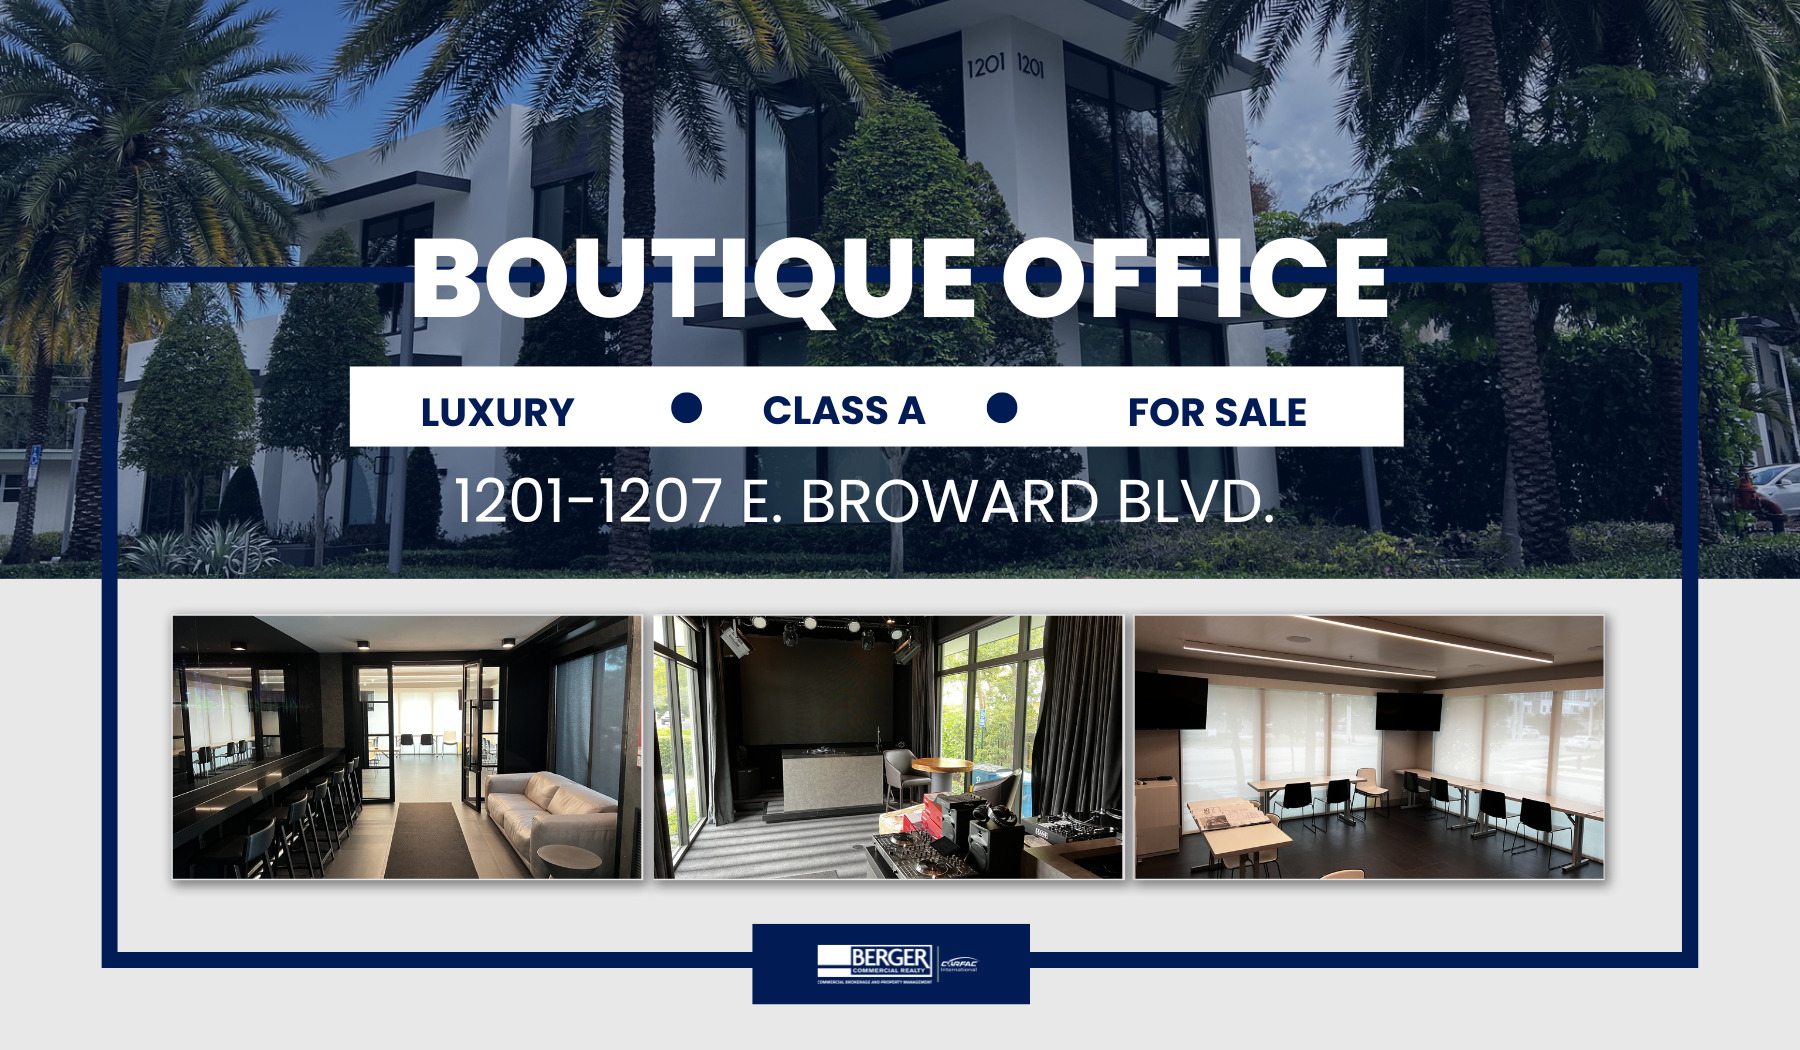 Premier Luxury Freestanding Office Building For Sale In Downtown Fort Lauderdale